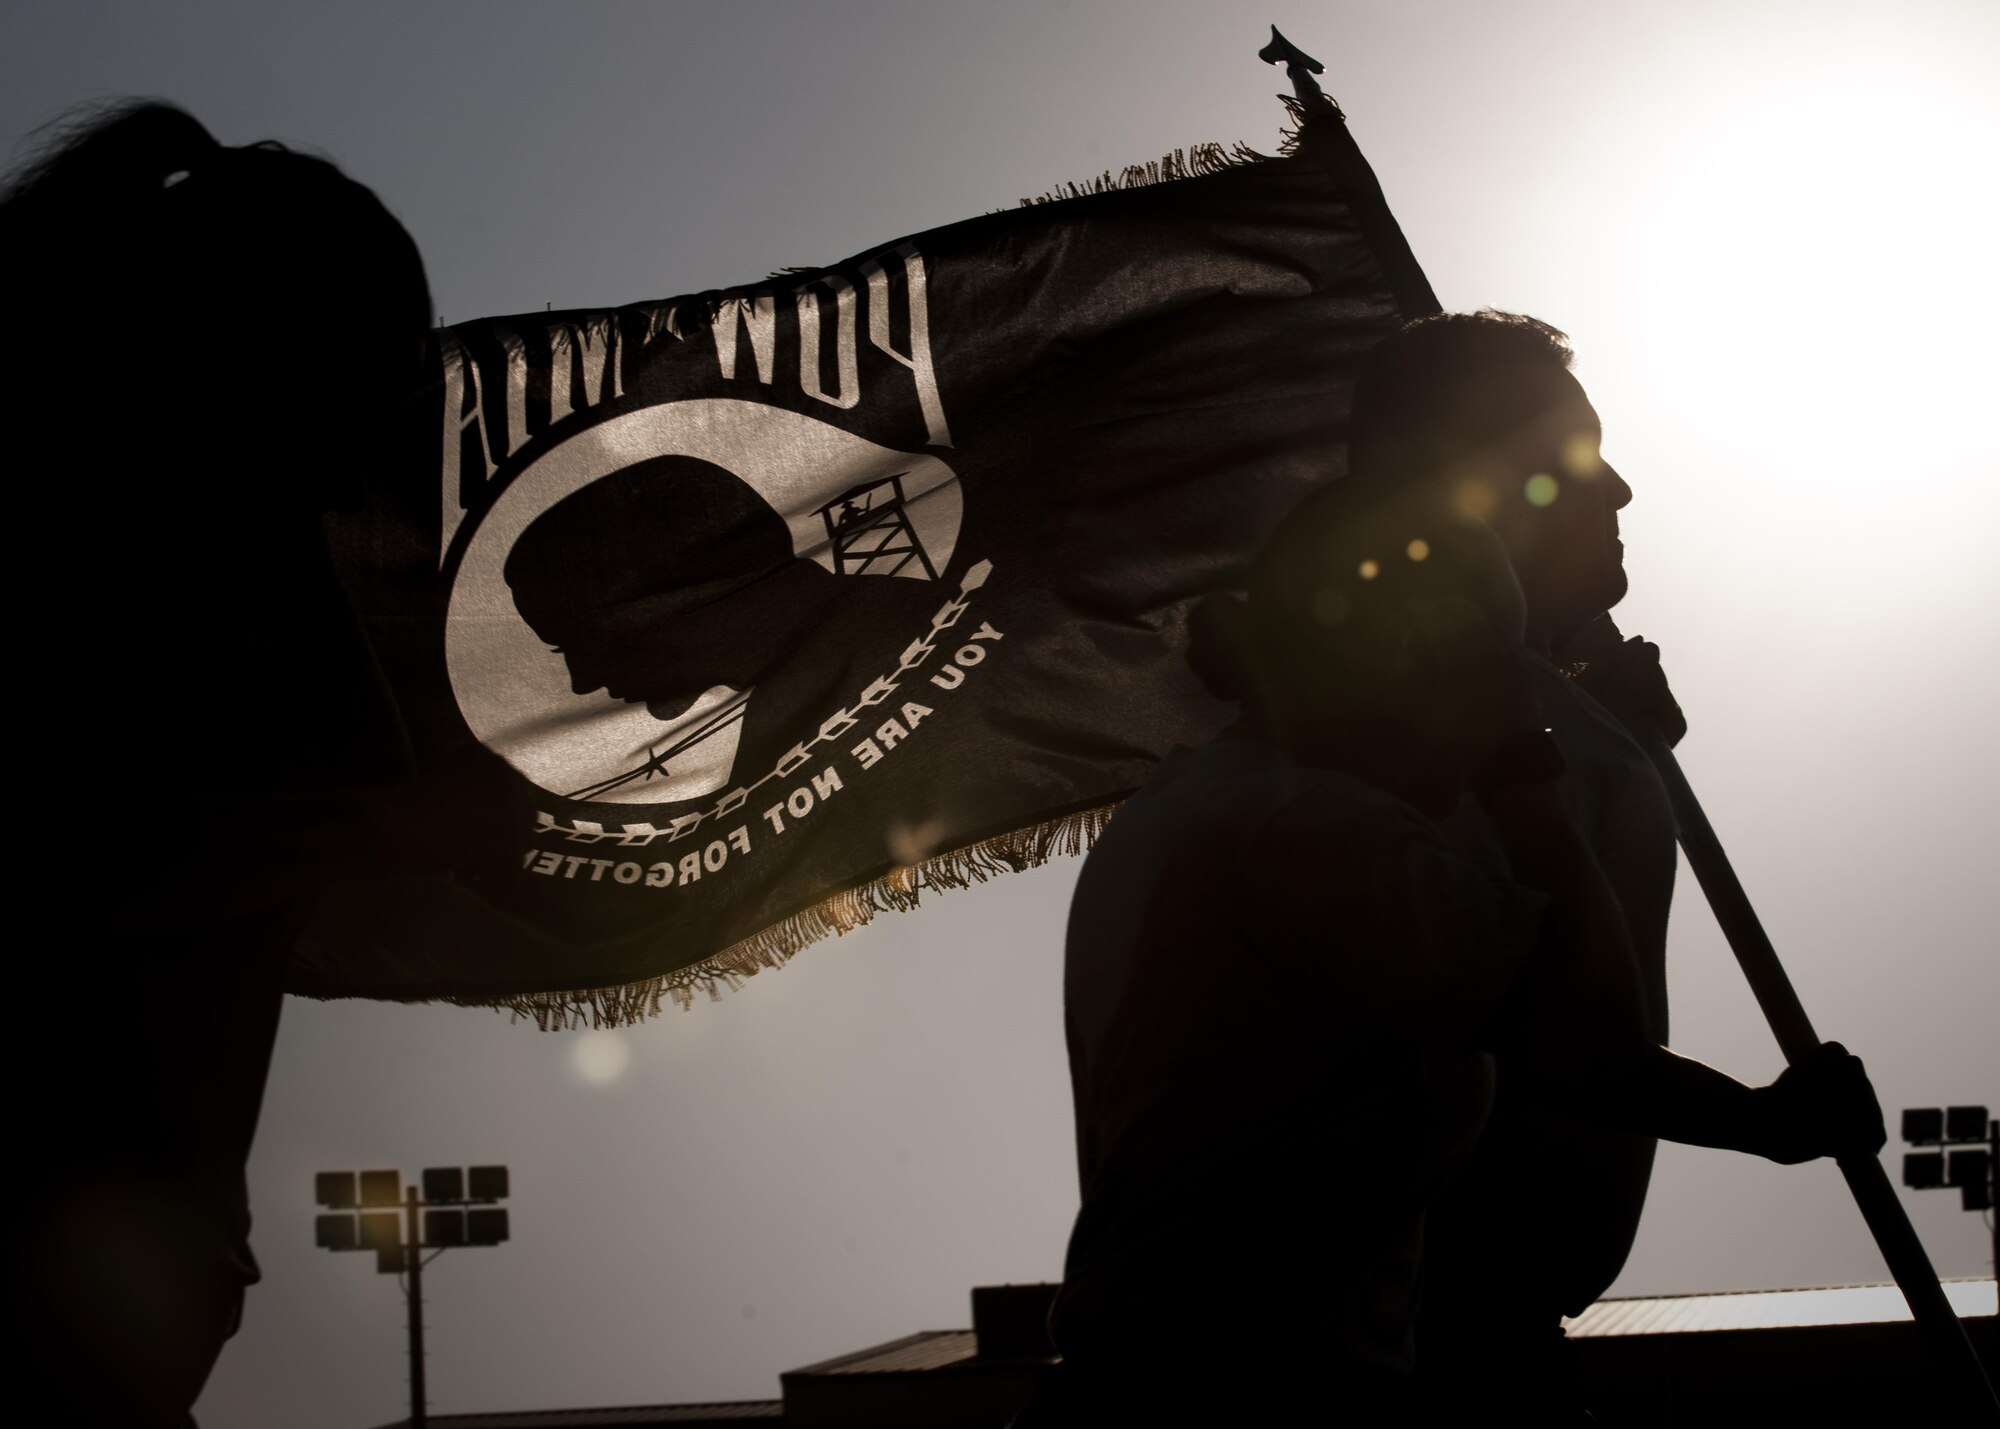 U.S. Air Force Airmen run with the Prisoner of War and Missing in Action flag during the POW/MIA Recognition Day at Kunsan Air Base, Republic of Korea, Sept. 14, 2017. Kunsan Airman and Soldiers participated in a 24-hour run in recognition of POW/MIA service members. This day was established by an Act of Congress, through the passage of Section 1082 of the 1998 Defense Authorization Act and is one of six days that the POW/MIA Flag can be flown.  (U.S. Air Force photo by Staff Sgt. Victoria H. Taylor)